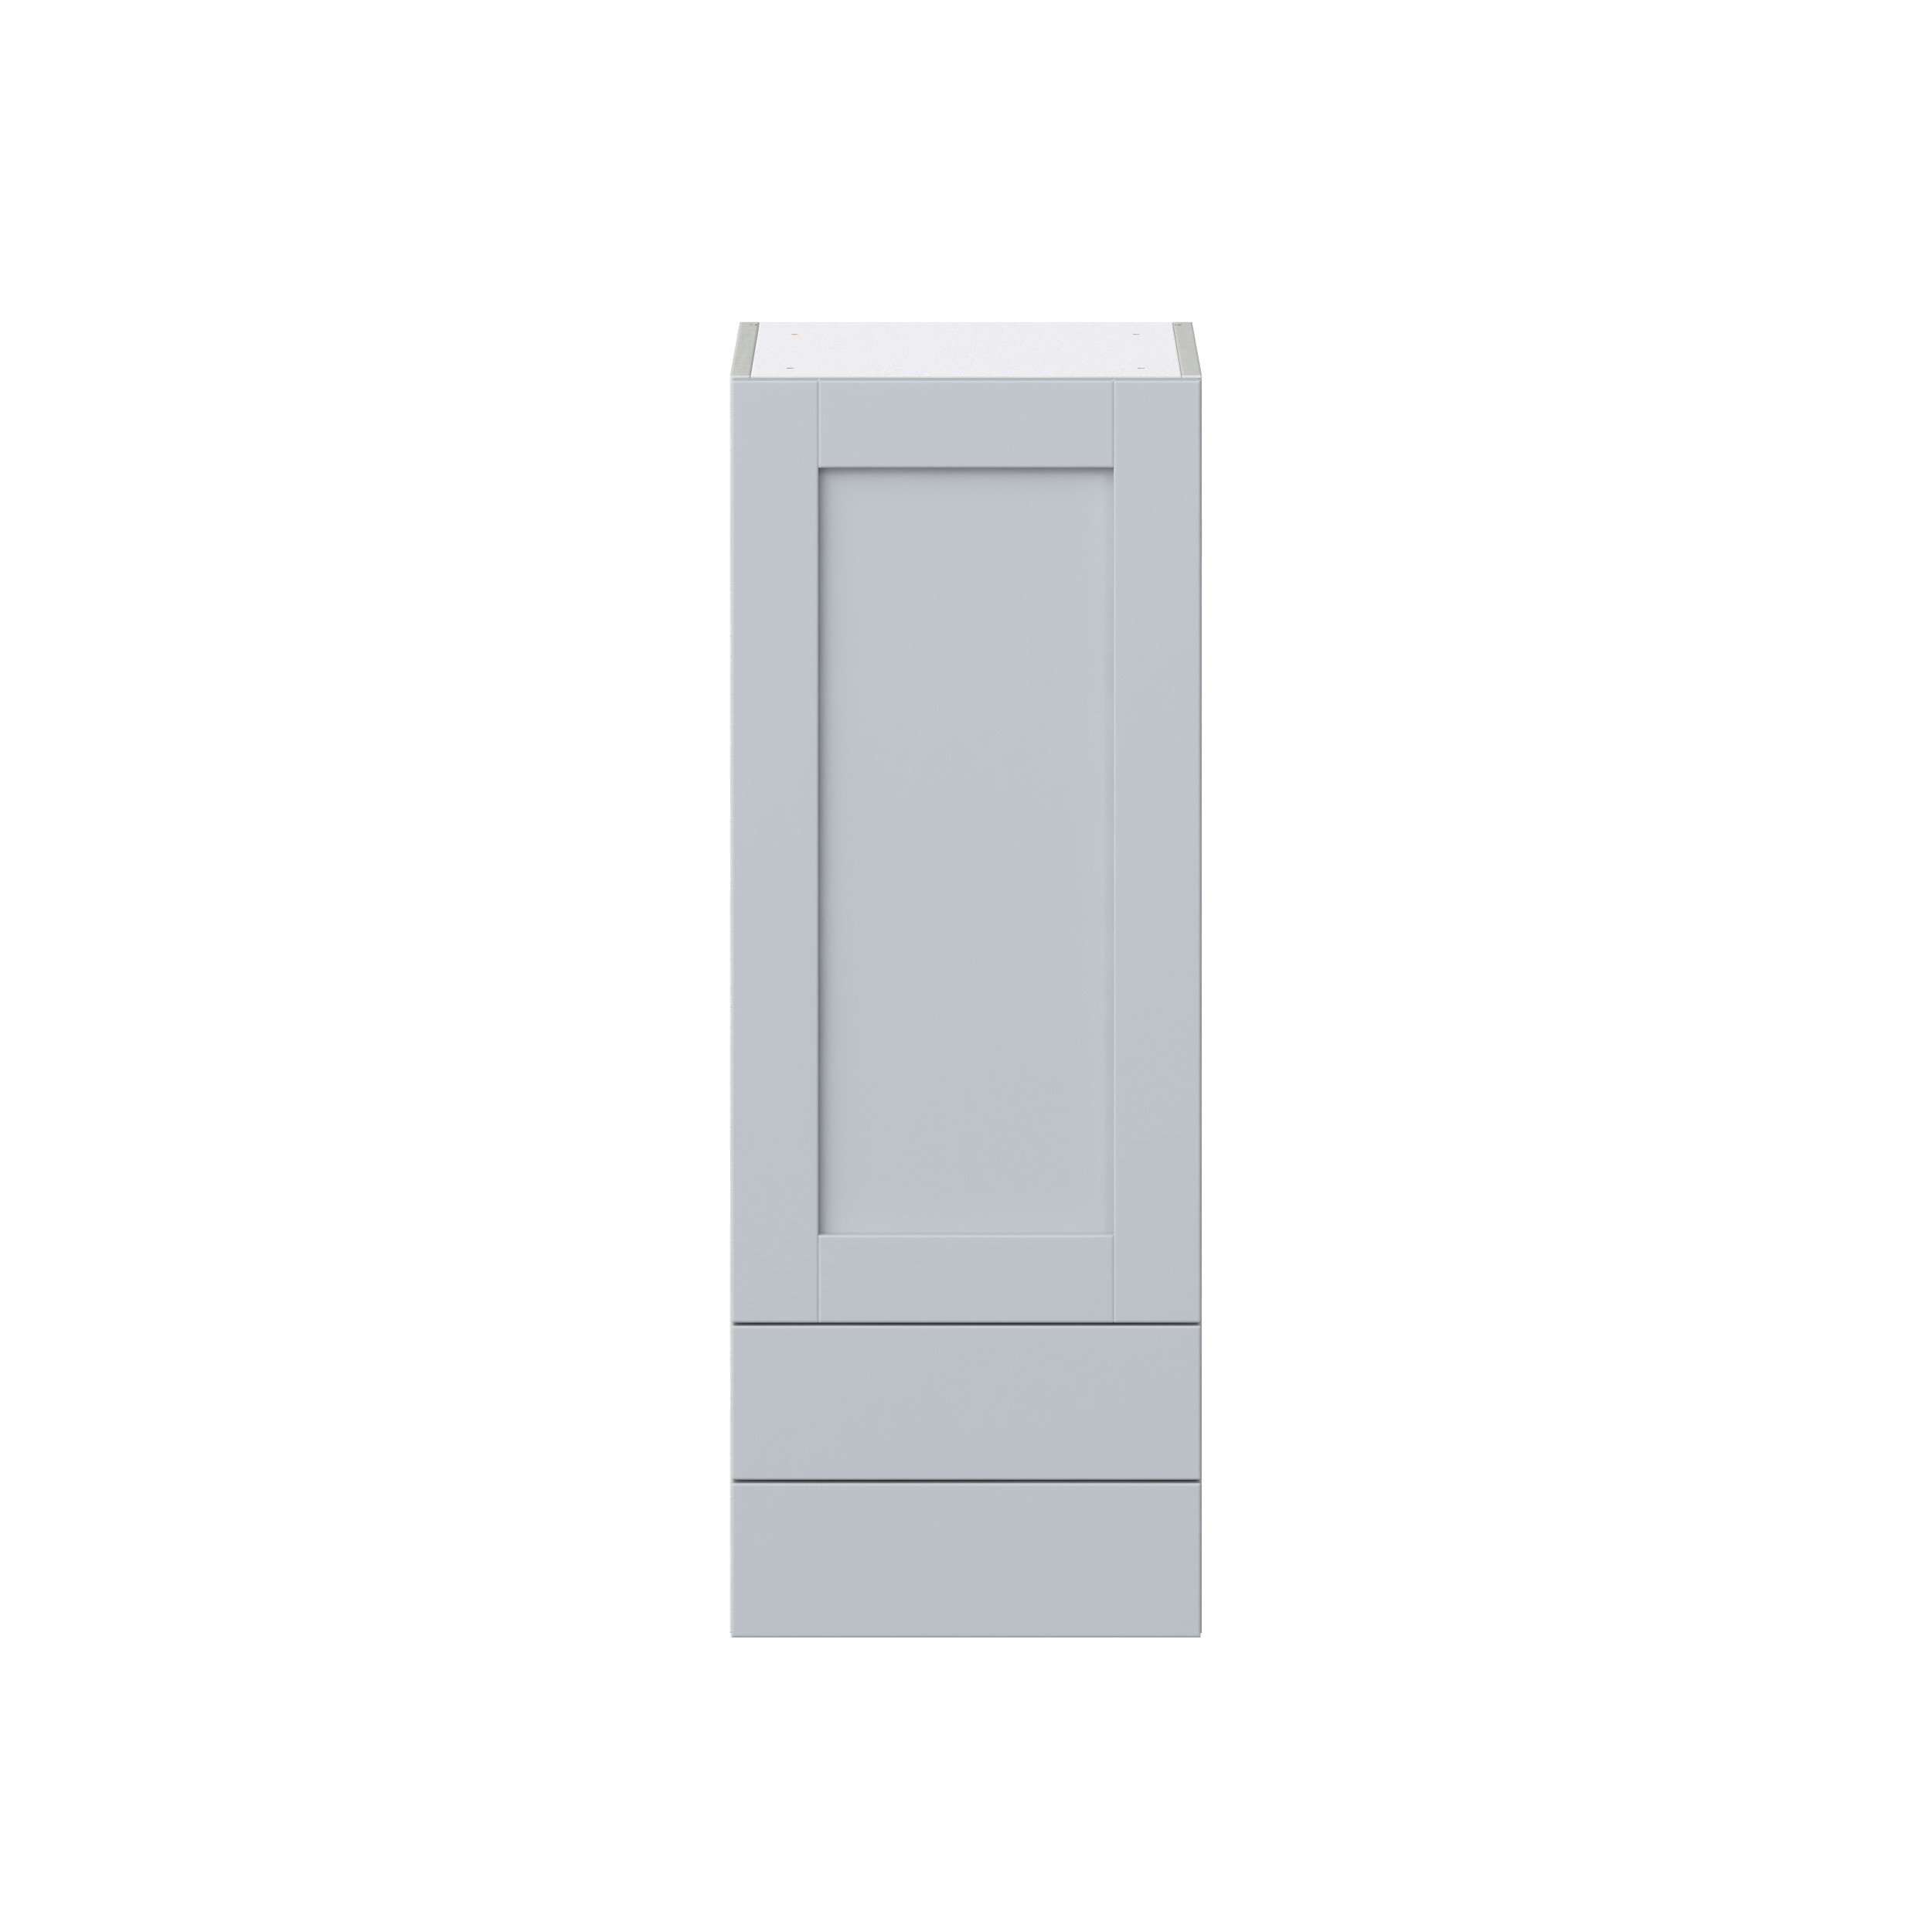 Sea Holly Light Gray Shaker Assembled Wall Cabinet with a Door and Two 5 in. Drawers (15 in. W x 40 in. H x 14 in. D)